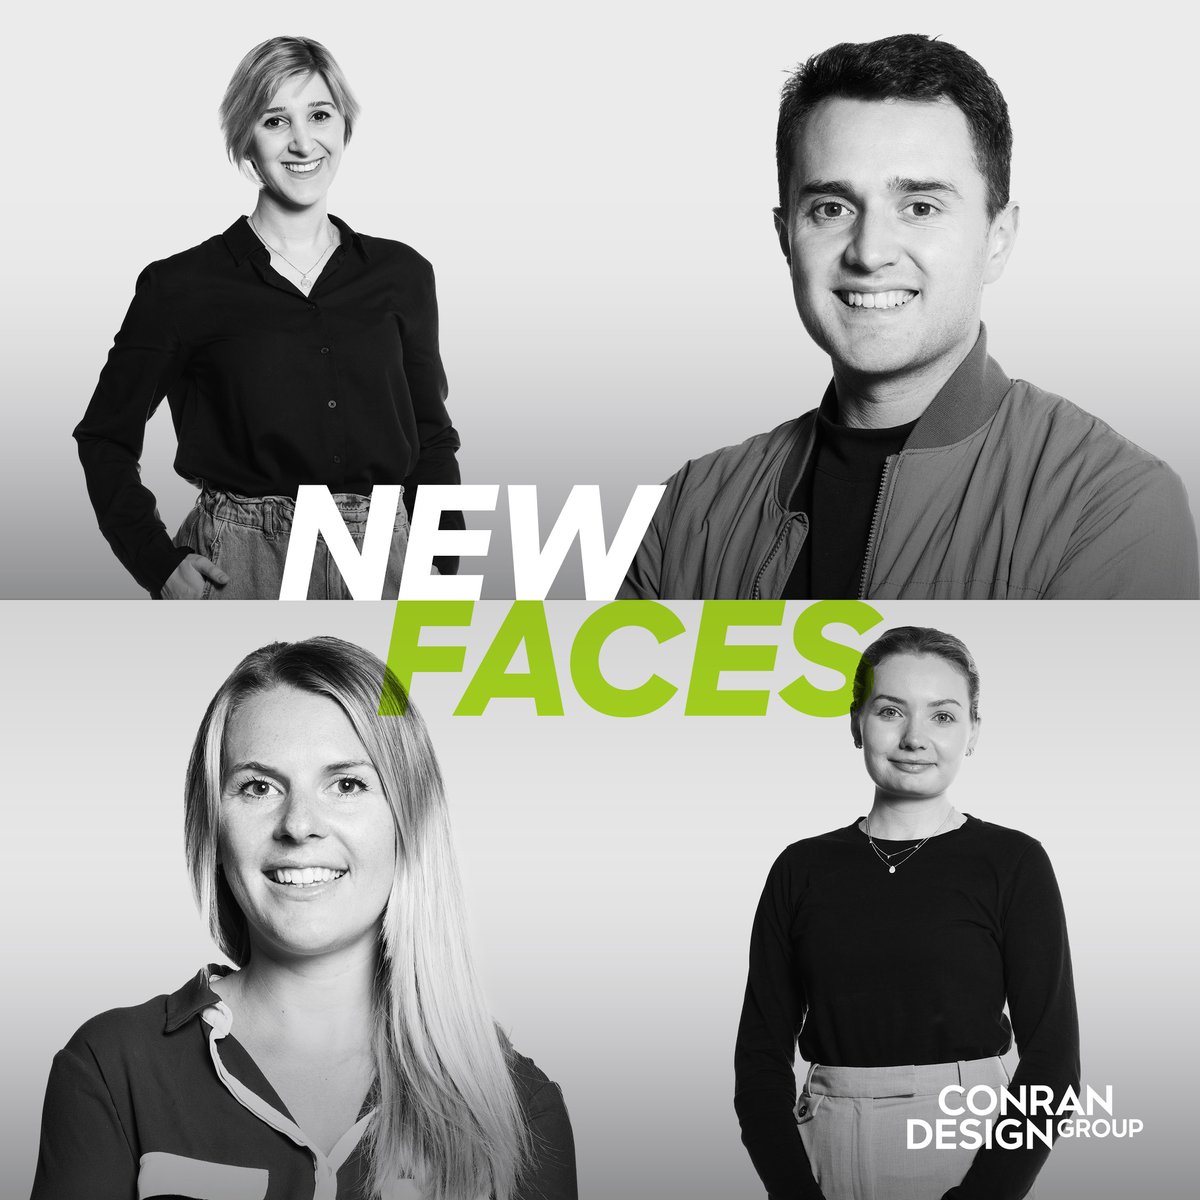 Some new faces in the London studio: say hello to Antoanet, Tom, Amy and Rachael! Working across brand strategy, client services and new business, they’ll be helping us pinpoint crucial challenges and opportunities for the brands we work with. Welcome to the team, all! #newhires